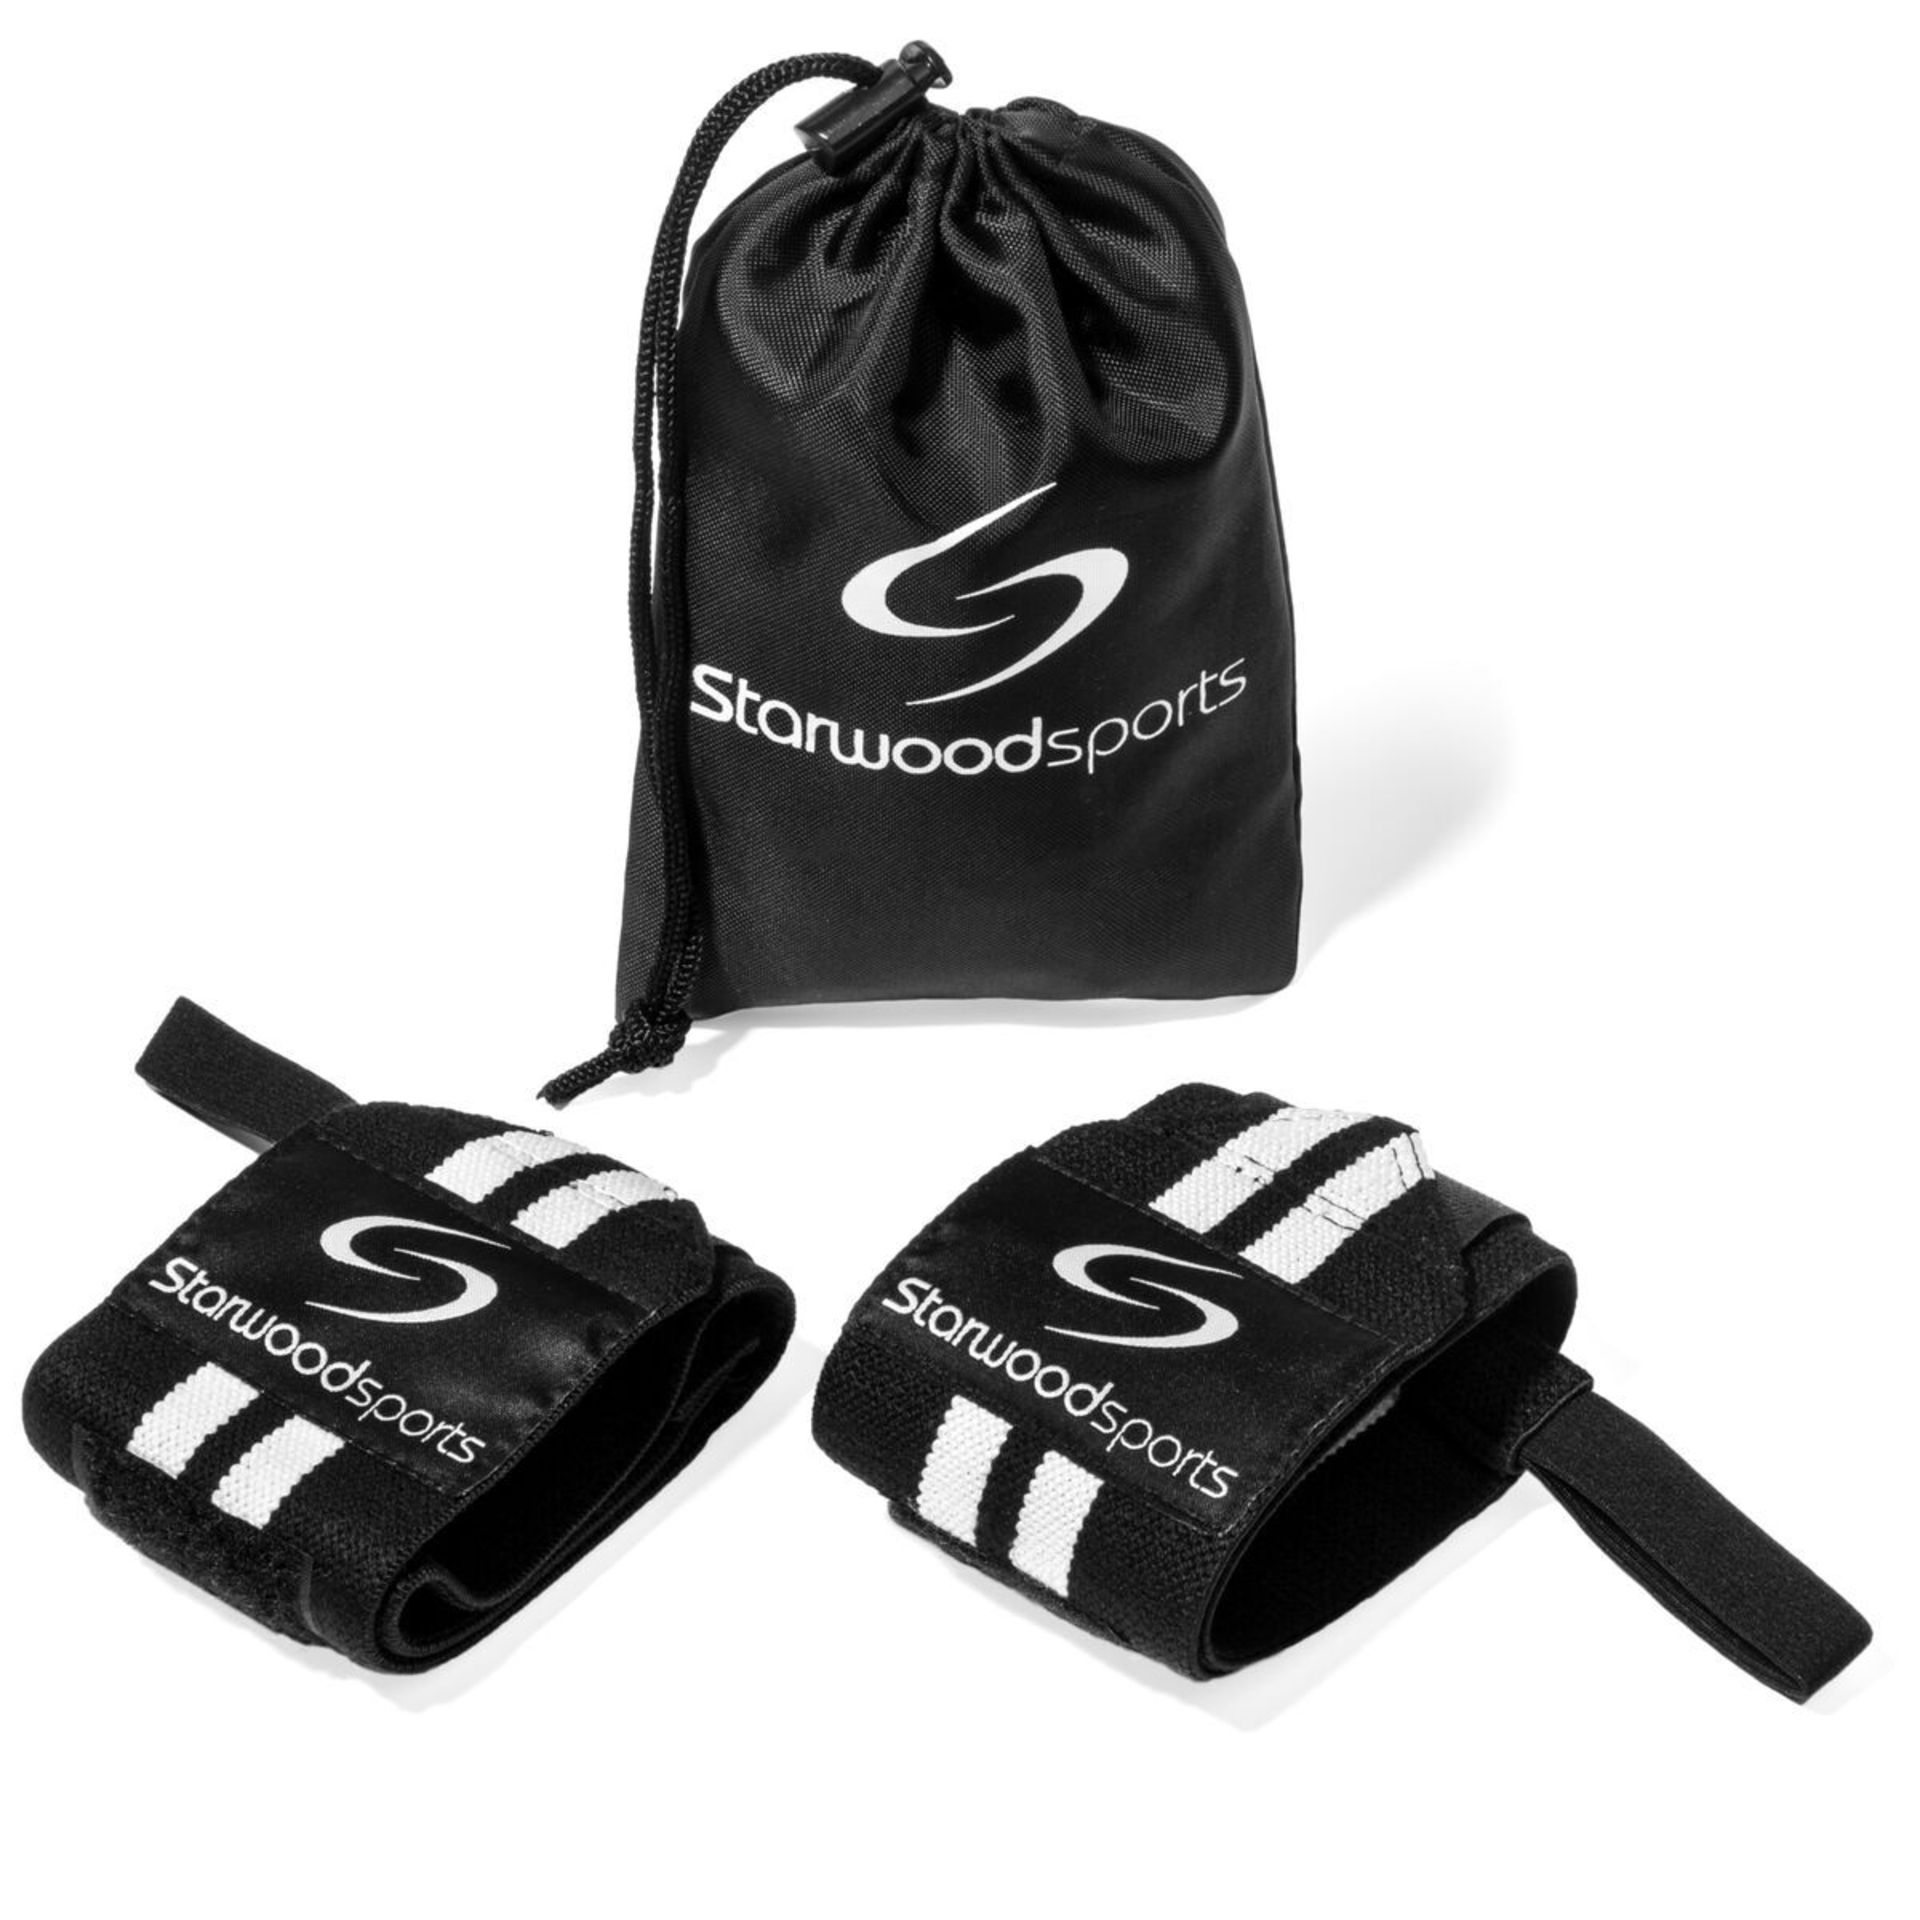 80 X BRAND NEW STARWOOD SPORTS BRANDED PAIRS OF WRIST STRAPS IN A BAG - (PICK LOOSE) - Image 2 of 2